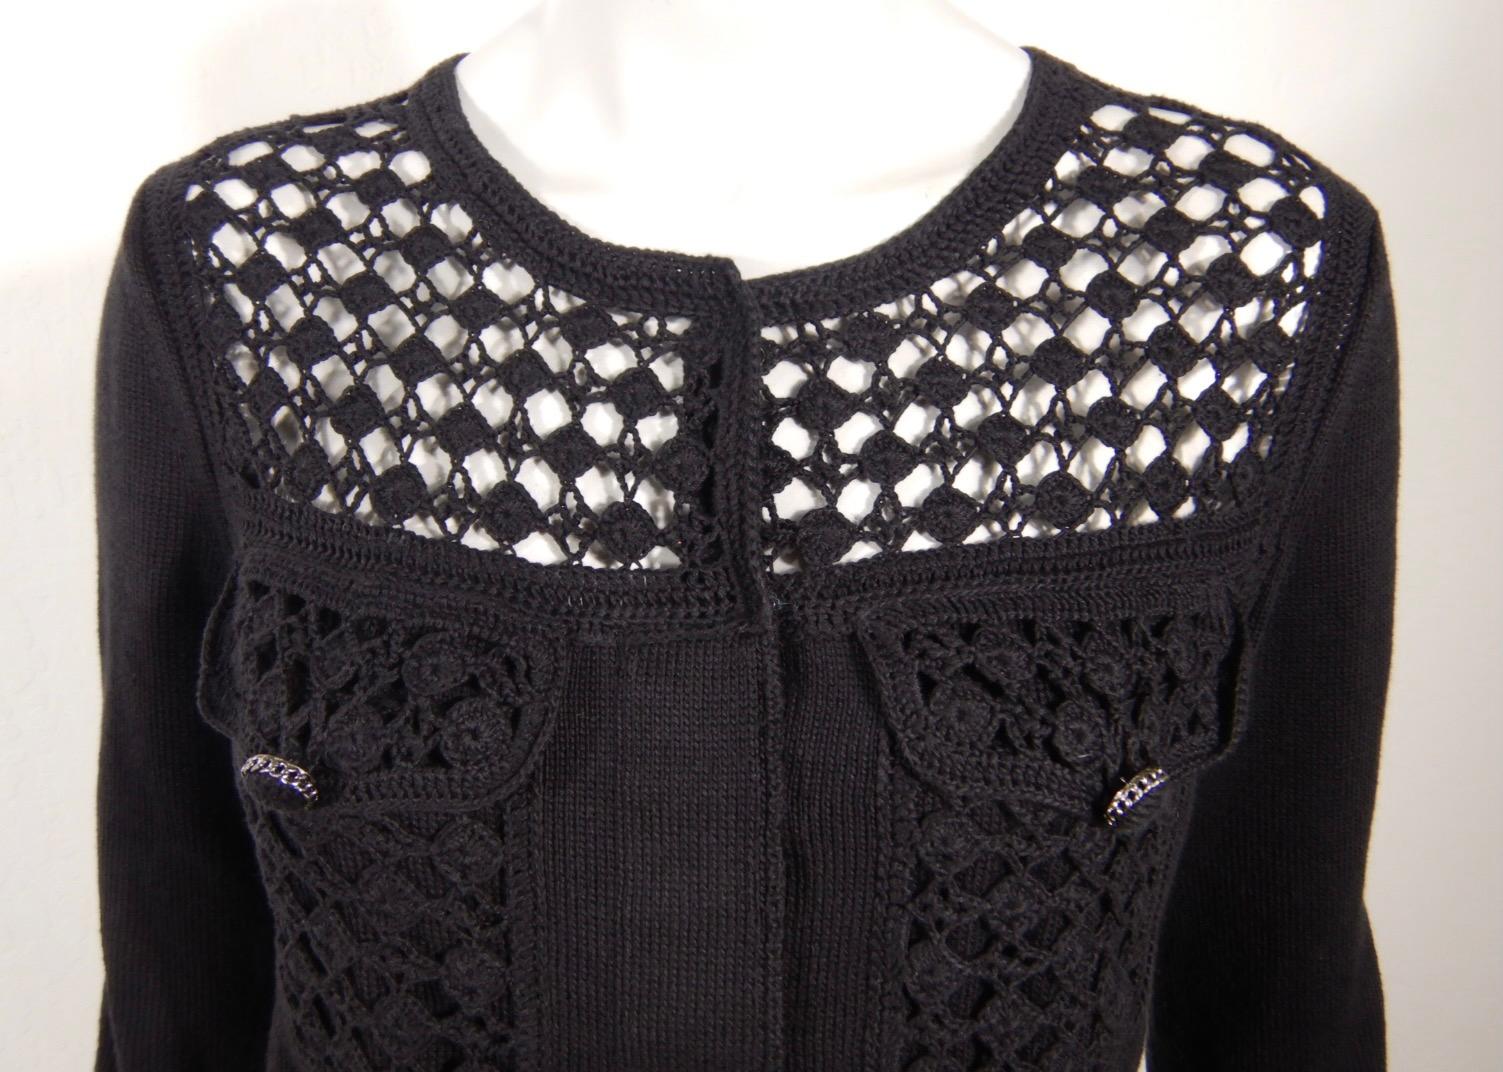 Chanel Spring 2006 Black Knit Cardigan Sweater In Good Condition For Sale In Oakland, CA